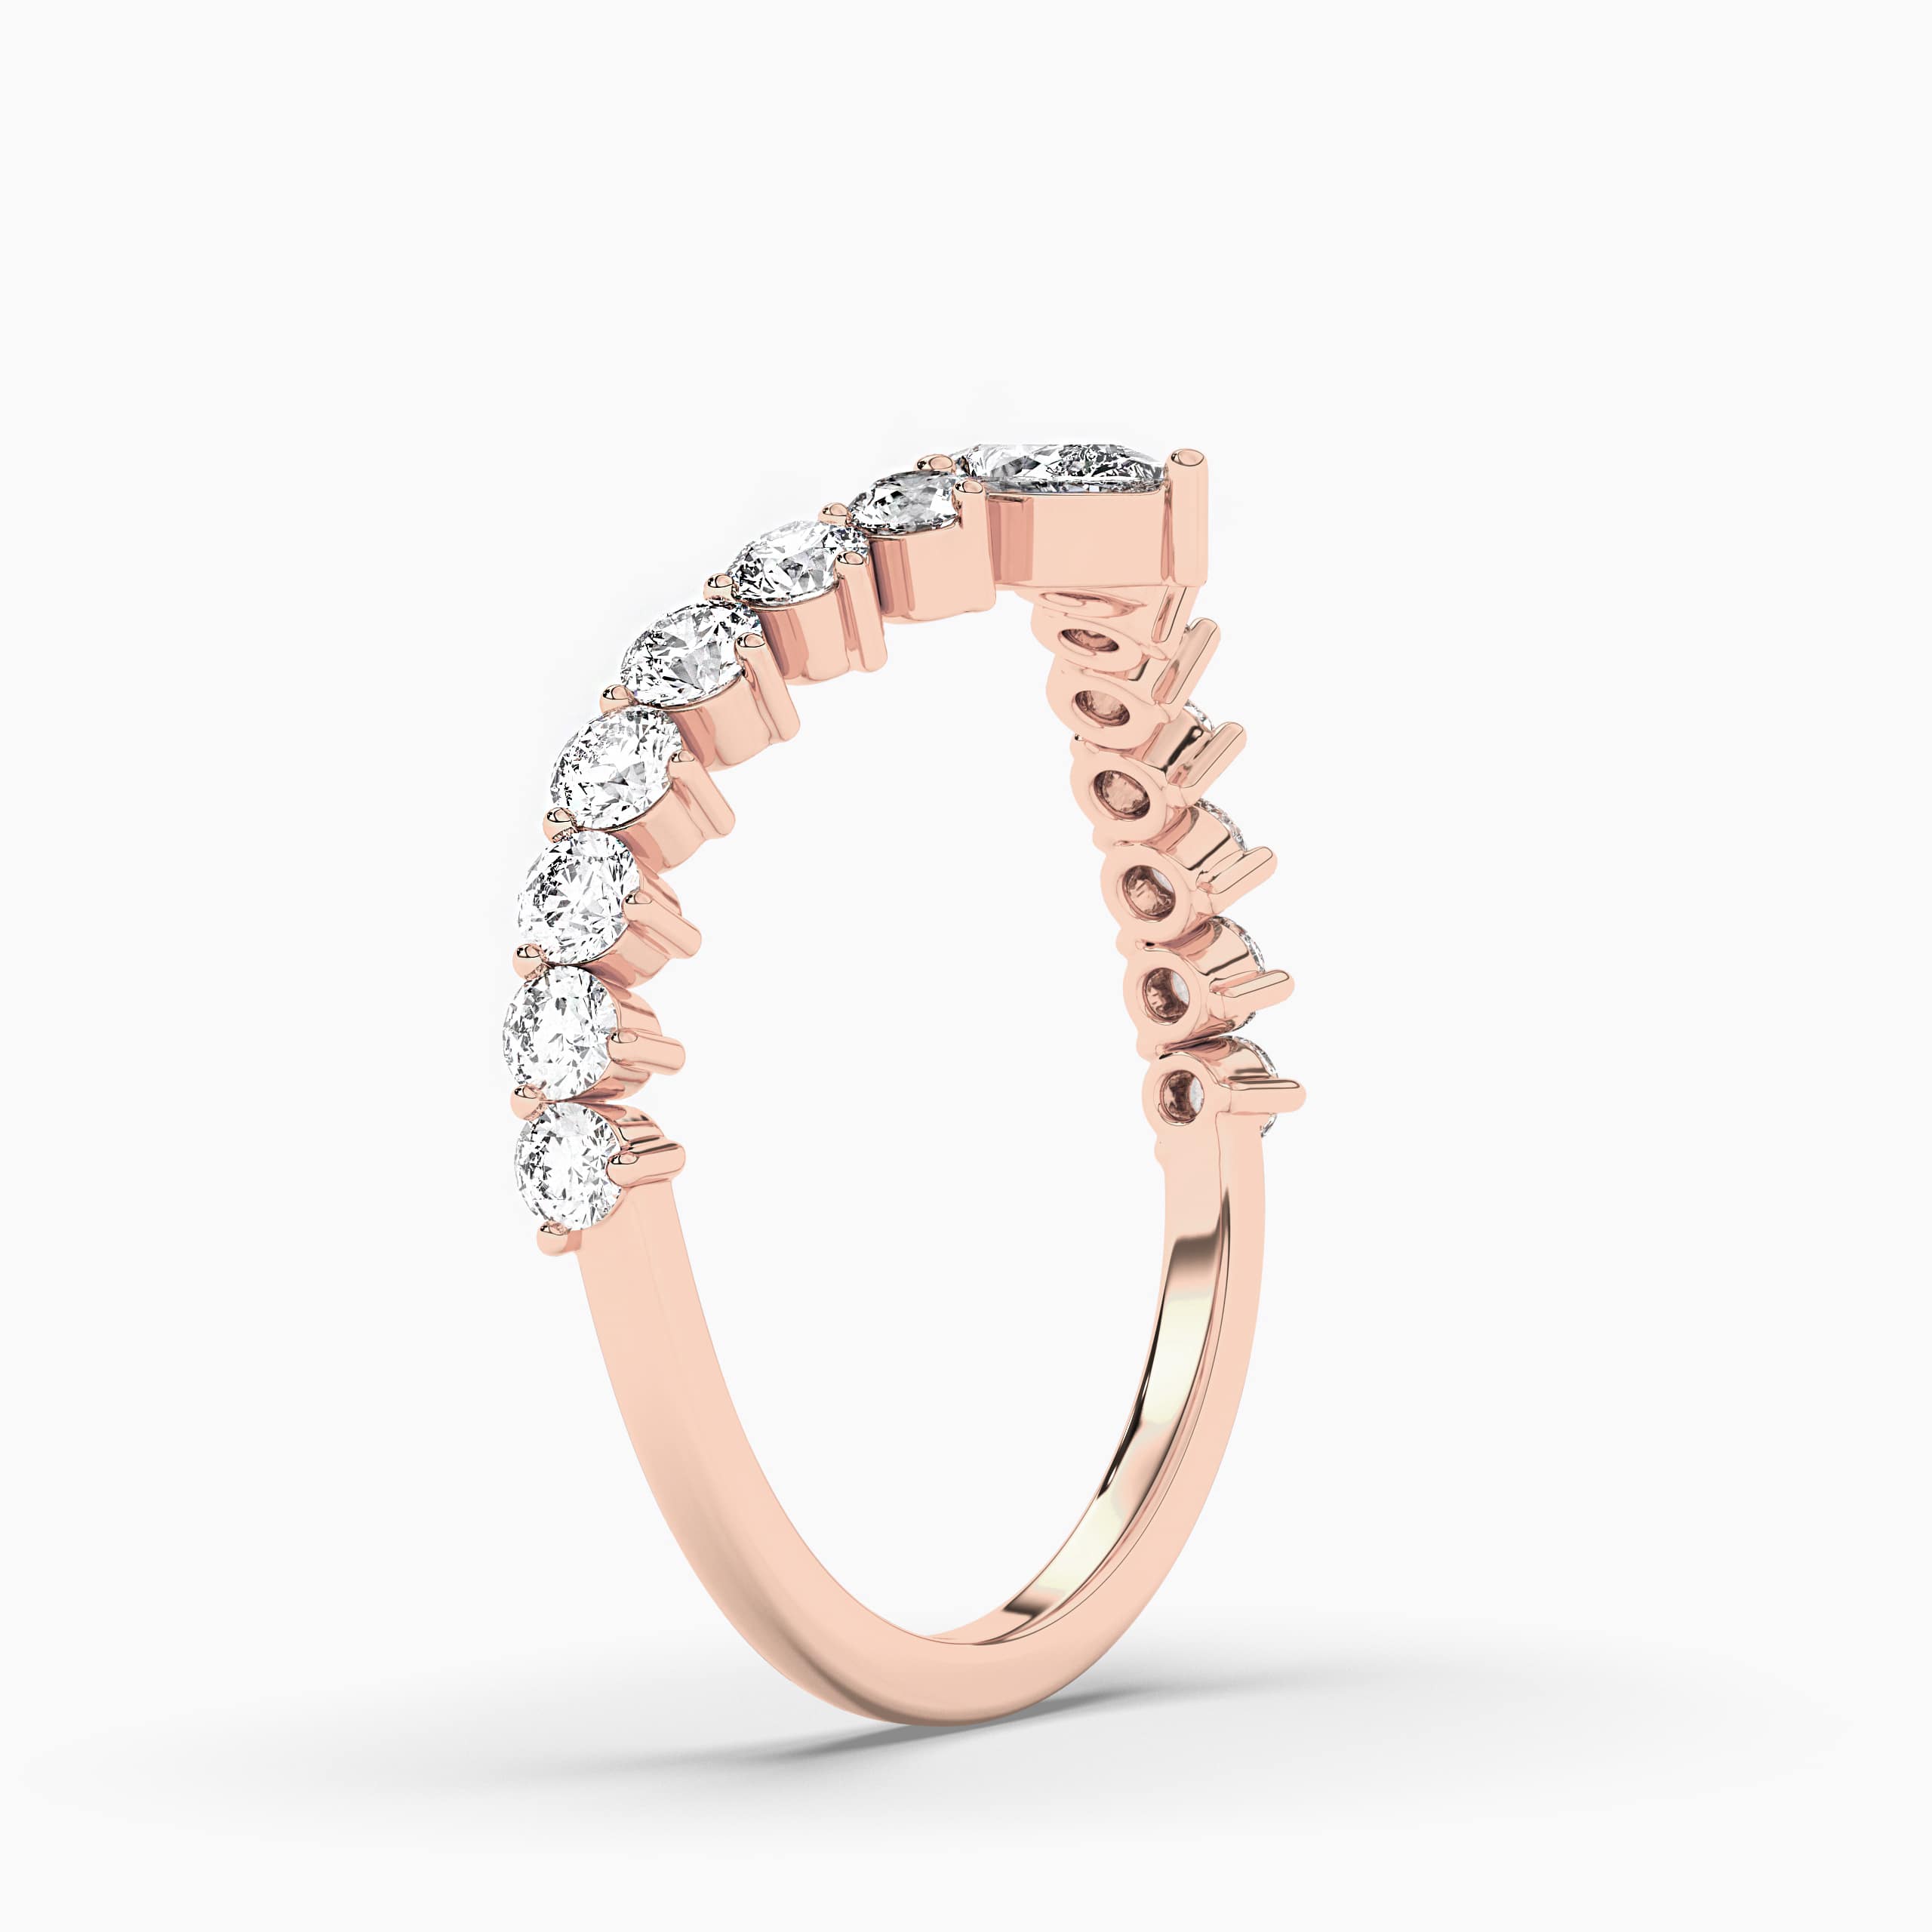 Pear shaped sapphire engagement ring set rose gold